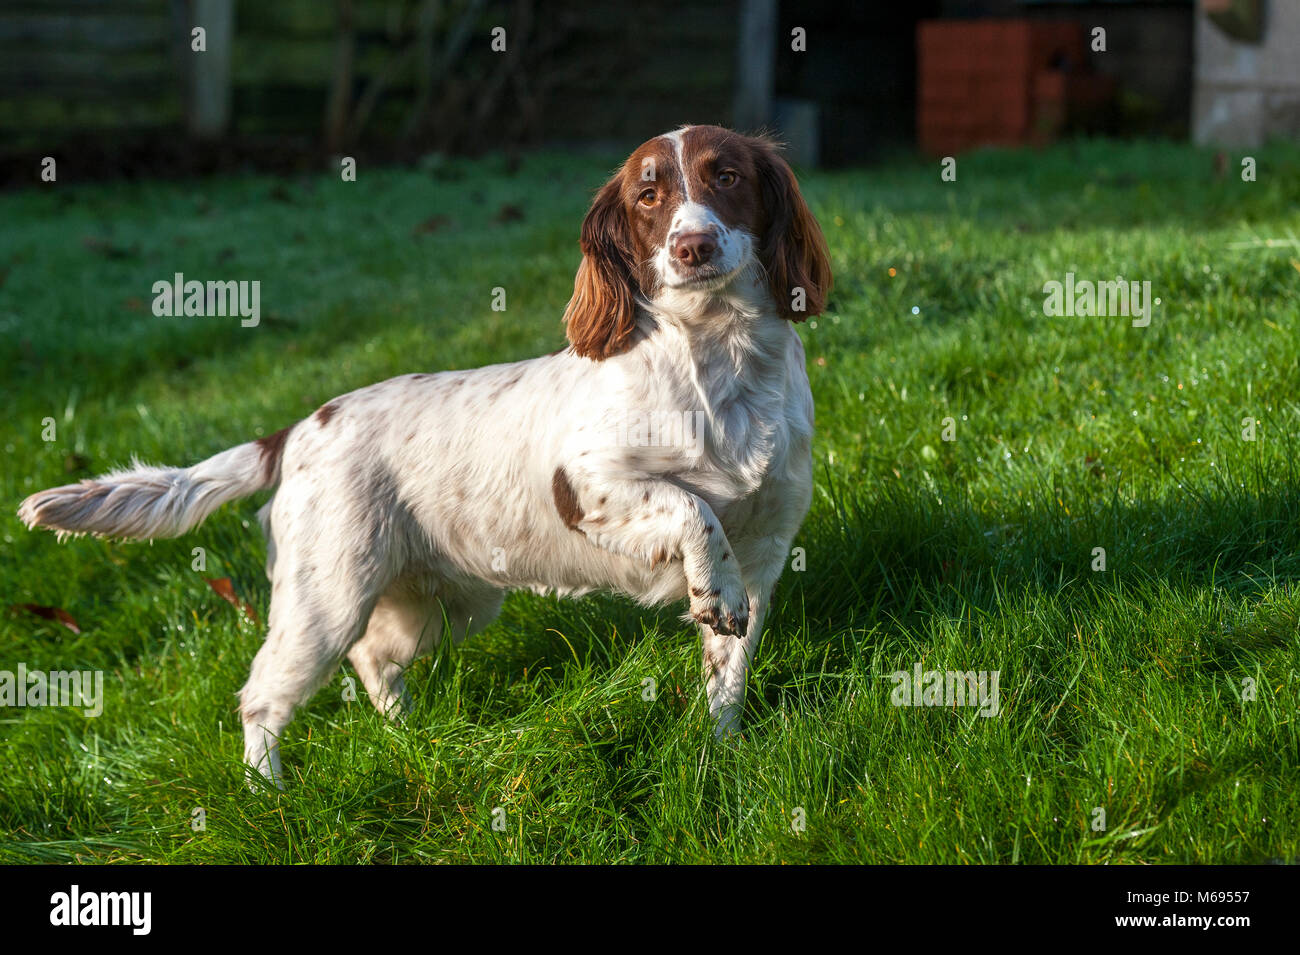 The English Springer Spaniel is a breed of gun dog in the Spaniel family traditionally used for flushing and retrieving game. Stock Photo